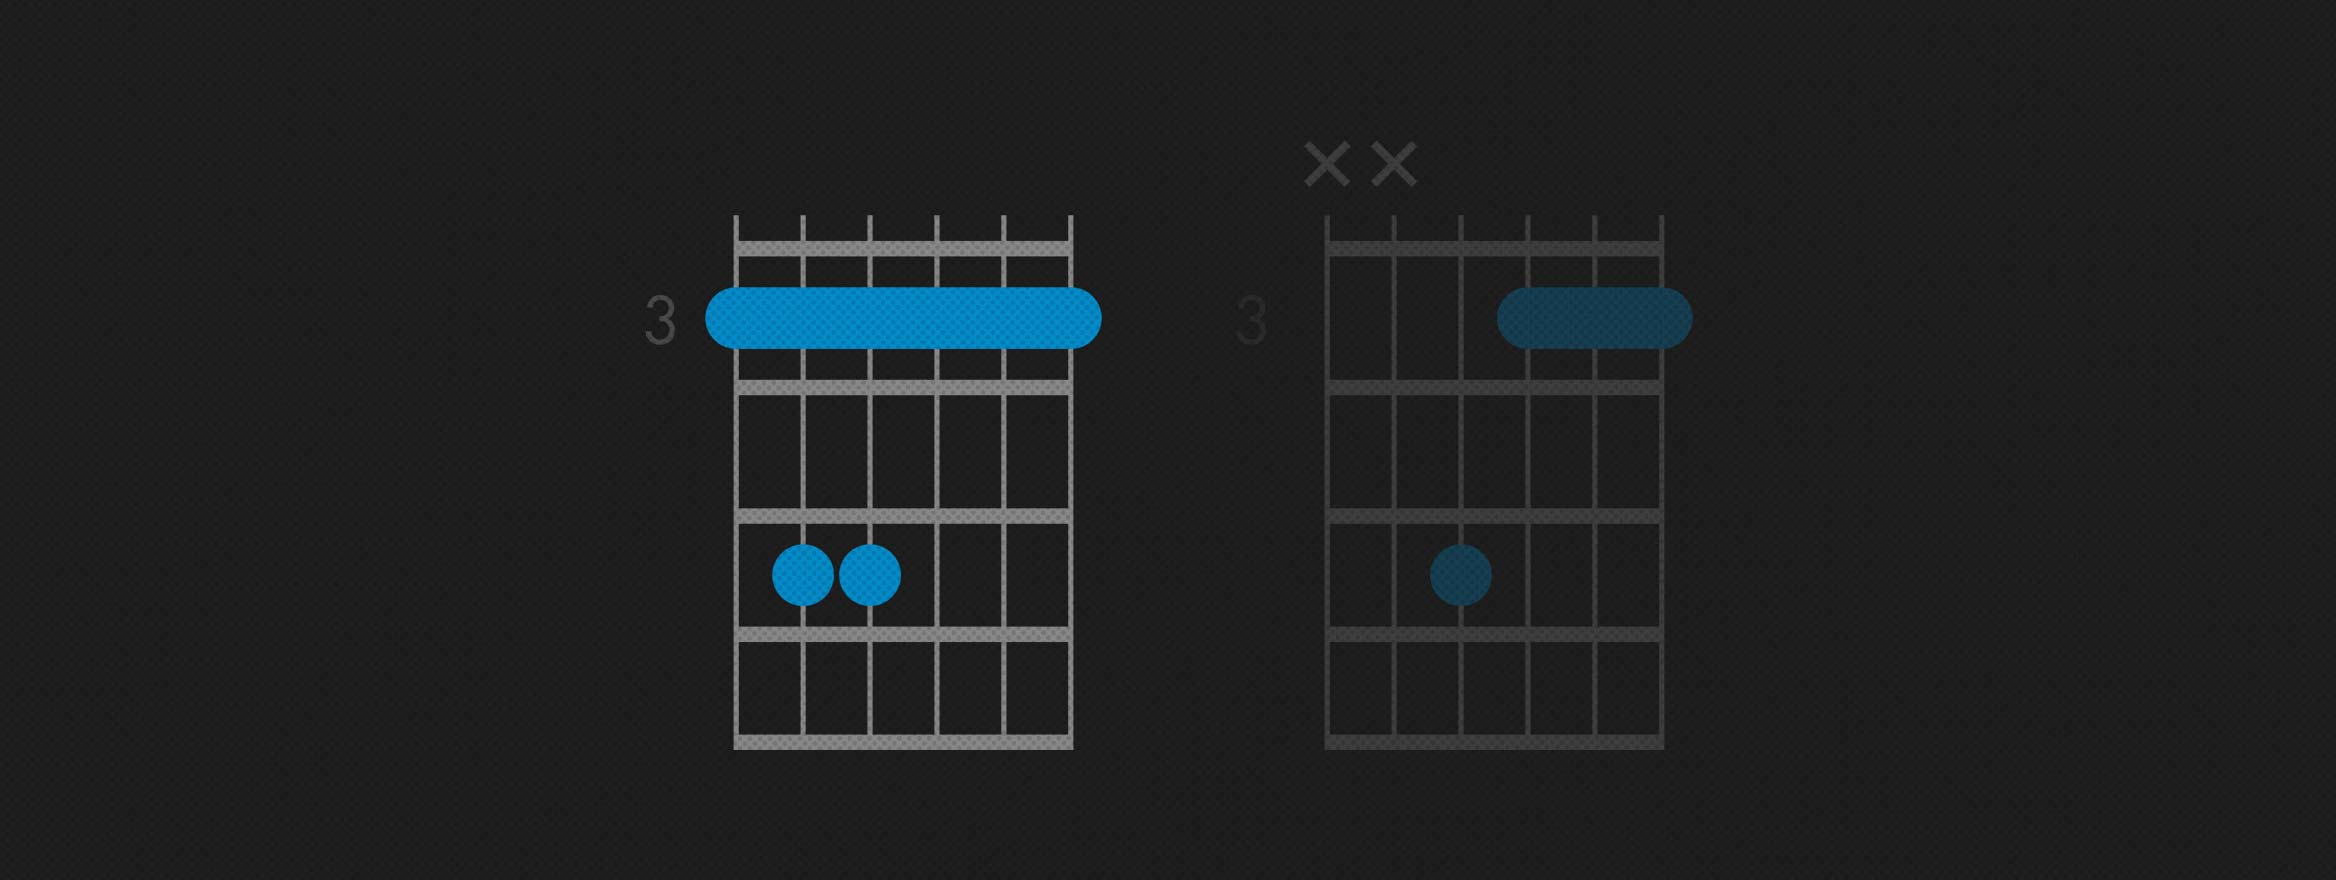 Which Is The Right Way To Play The G Chord?